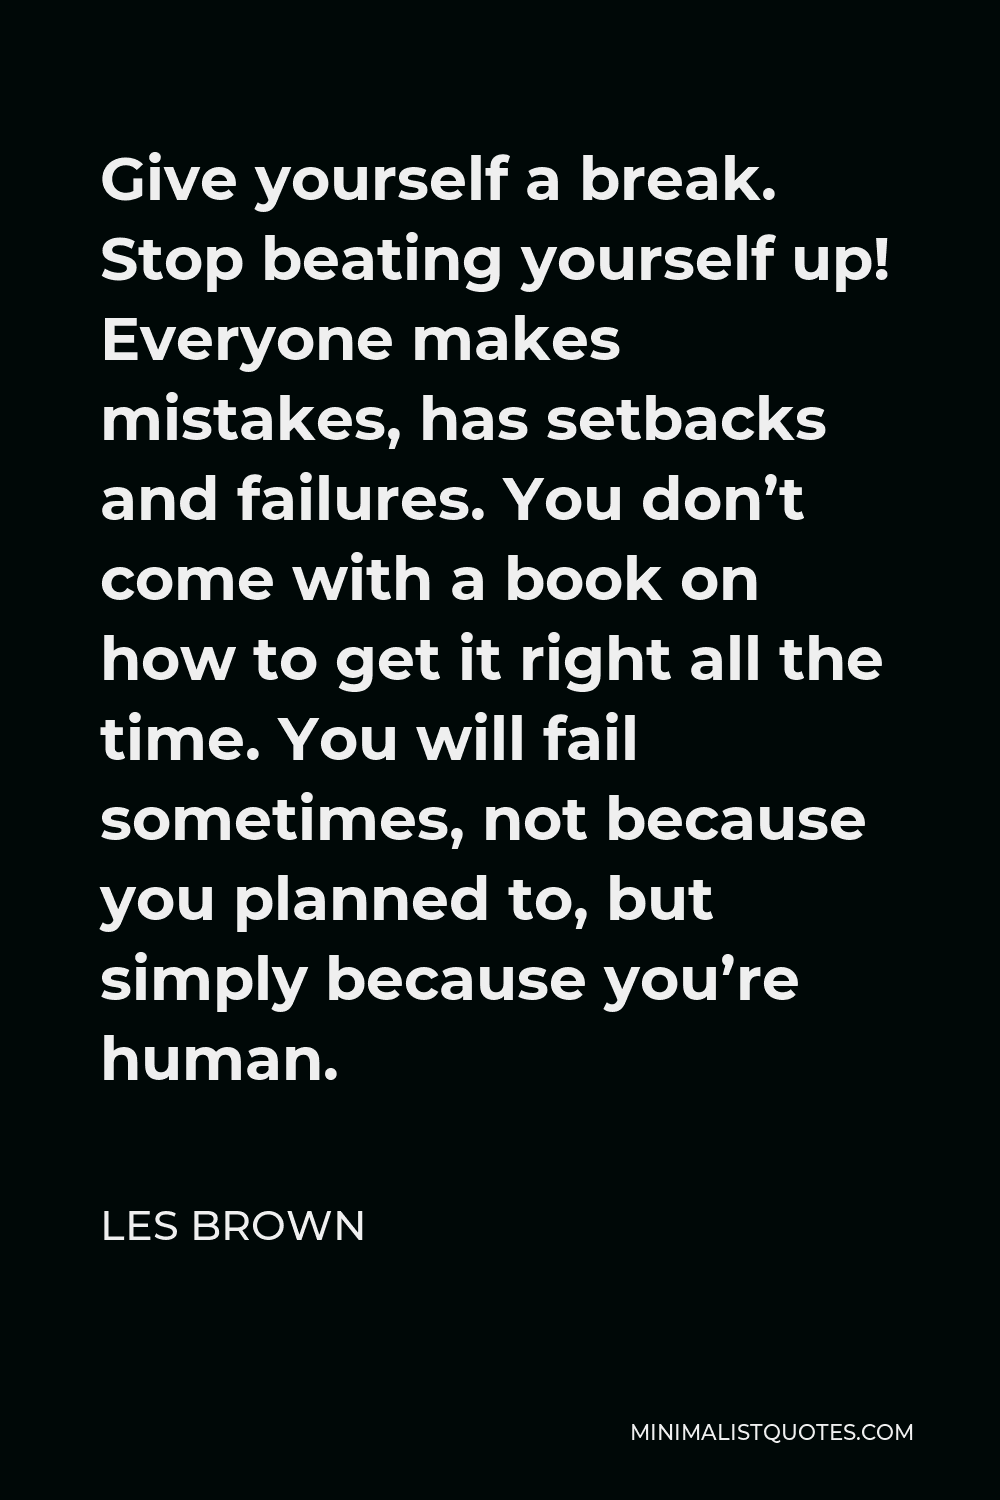 Les Brown Quote: Give Yourself A Break. Stop Beating Yourself Up! Everyone Makes Mistakes, Has Setbacks And Failures. You Don't Come With A Book On How To Get It Right All The